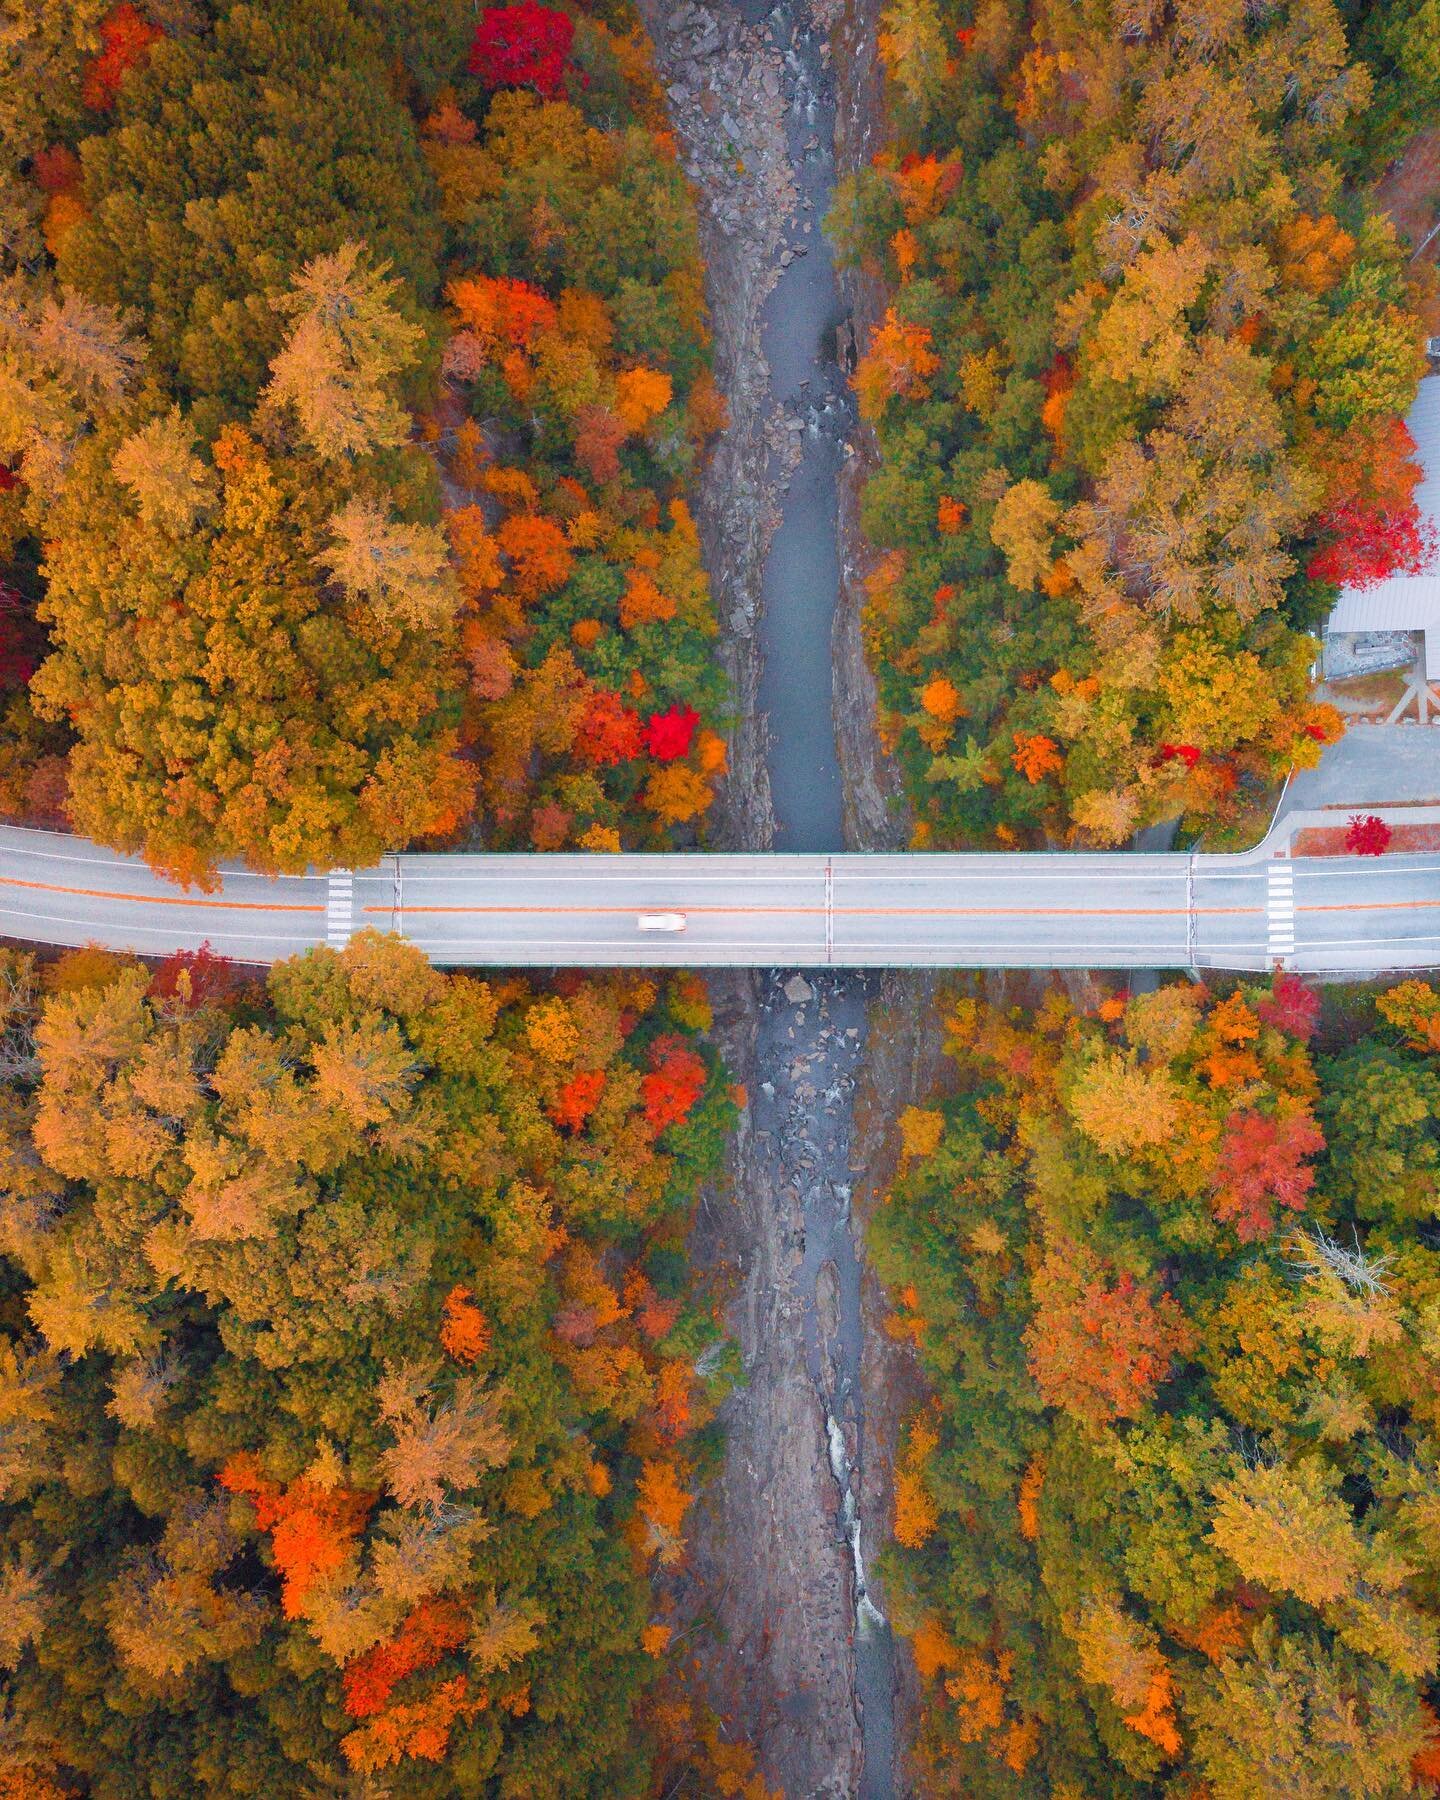 Fall colors at Queeche Gorge, Vermont 🍁

After a long day of shooting foliage in Northern Vermont, I was making my way down to Woodstock to spend the night! Before making it into town a made a quick stop at Queeche Gorge. Sending my drone up as fast